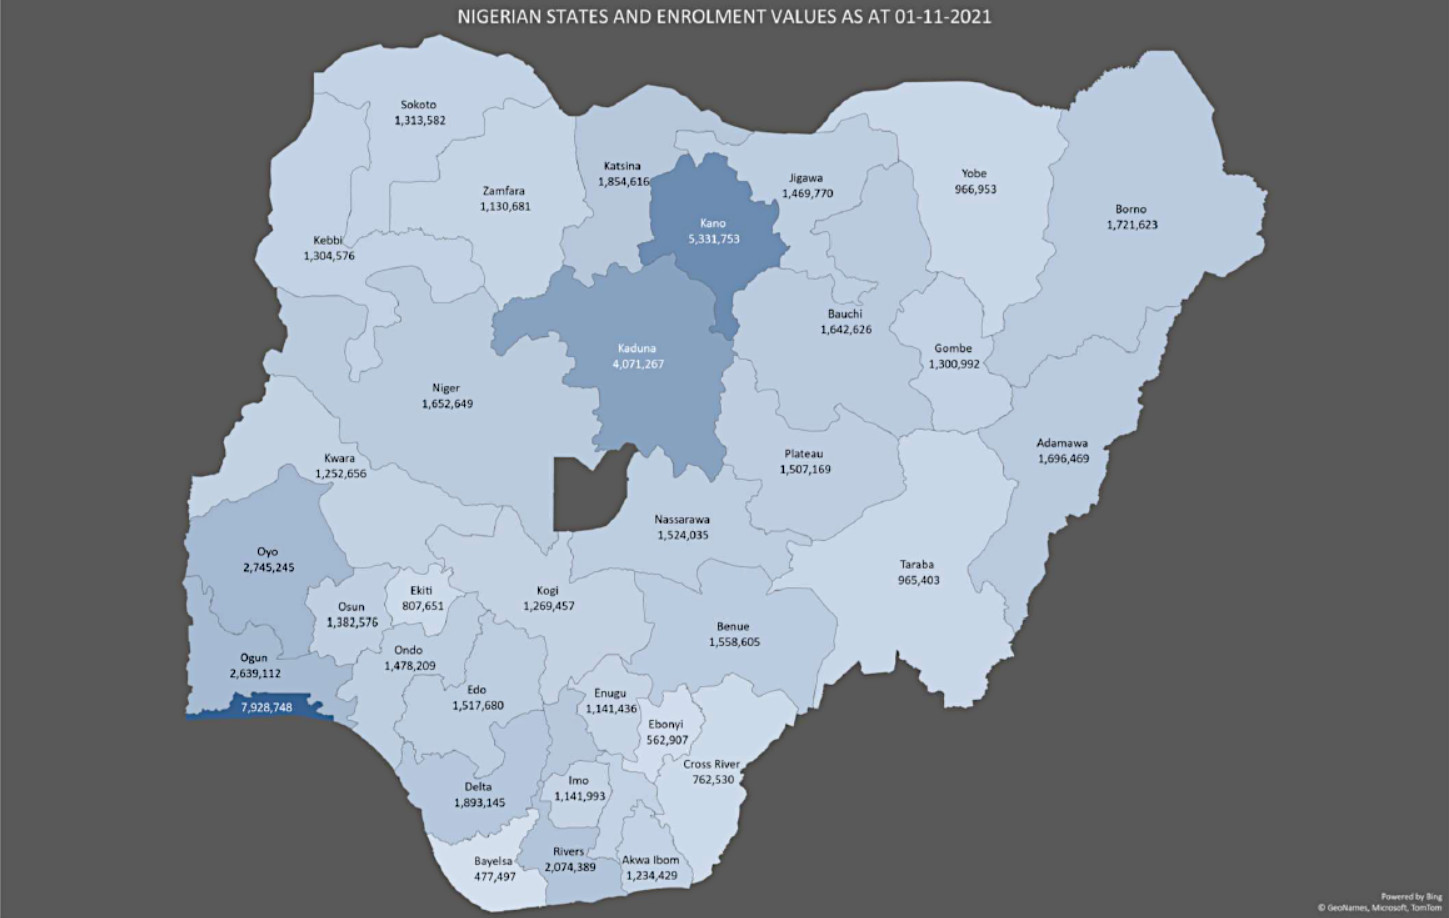 Map of Nigeria showing enrolment values for states as November 1, 2021